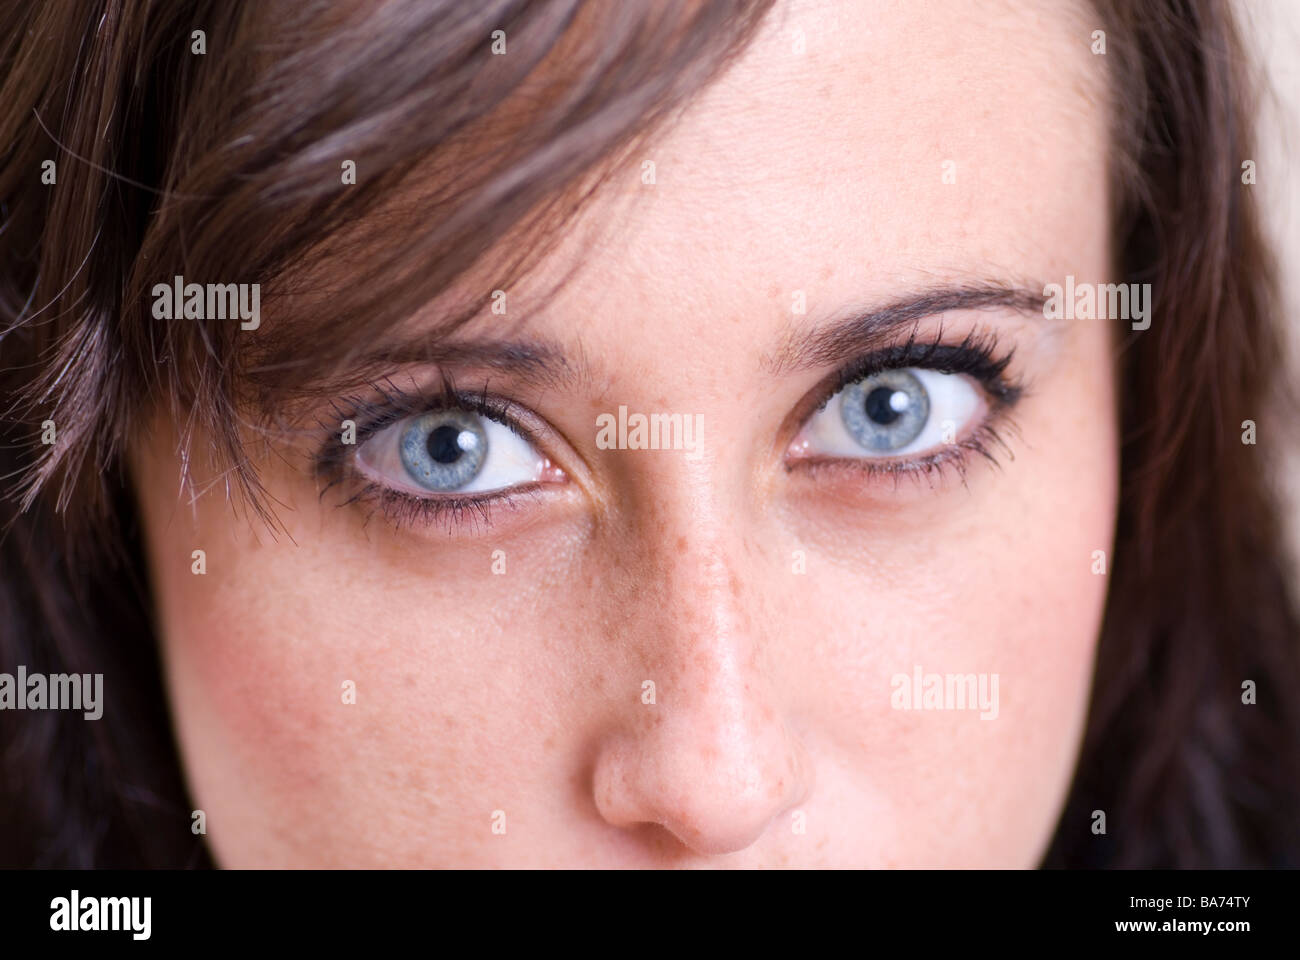 Close up of a young woman with blue eyes looking at camera Stock Photo